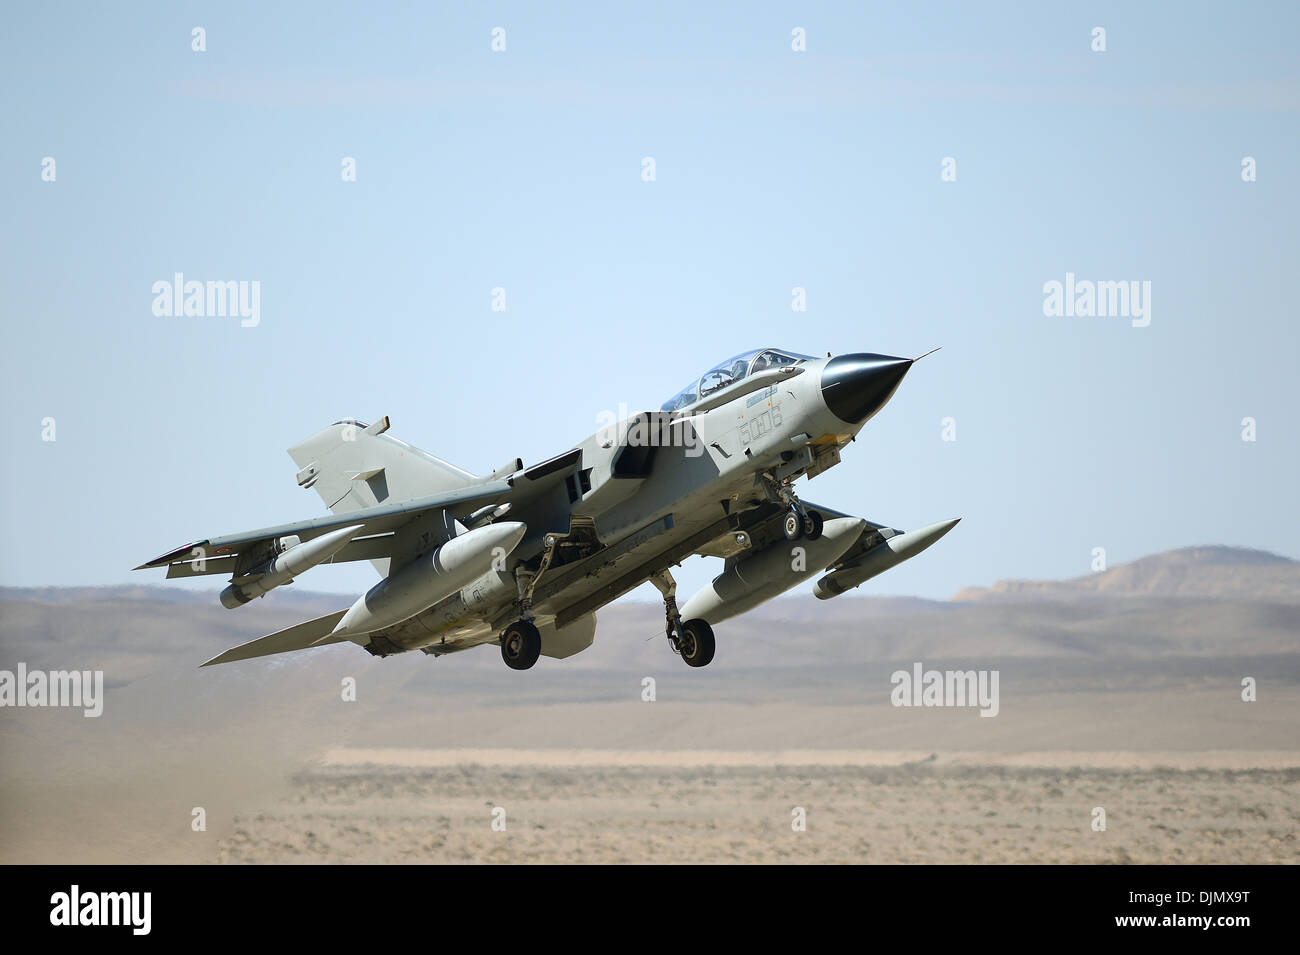 An Italian Air Force Tornado takes off from Uvda Air Force Base, Israel during the Blue Flag exercise Nov. 26, 2013. Aircraft from the 492nd Fighter Squadron, Royal Air Force Lakenheath, deployed to participate in the exercise, which promoted improved ope Stock Photo